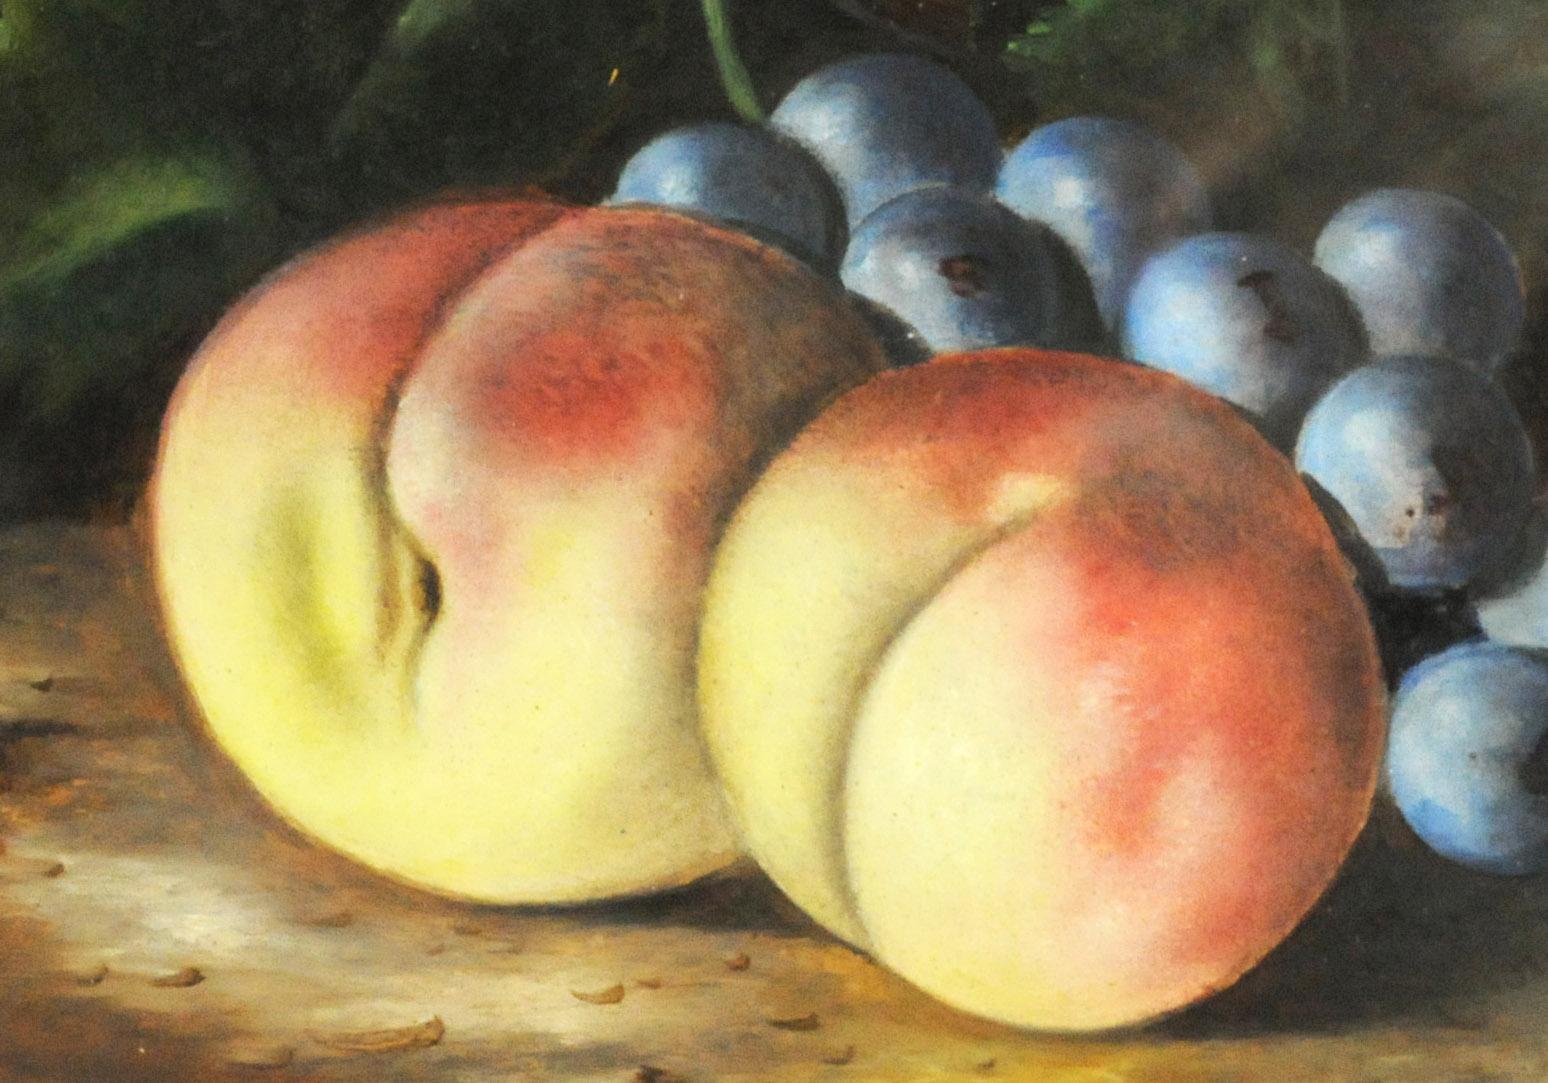 Still Life with Peaches and Grapes
Oil on paper, 1890
Signed and dated lower right (see photo)
Image size: 5 8 5/8 inches
Frame size: 10 x 13 1/2 inches
Housed in the original frame which has been reguilded (restored)
Purchased in Ohio
Nothing can